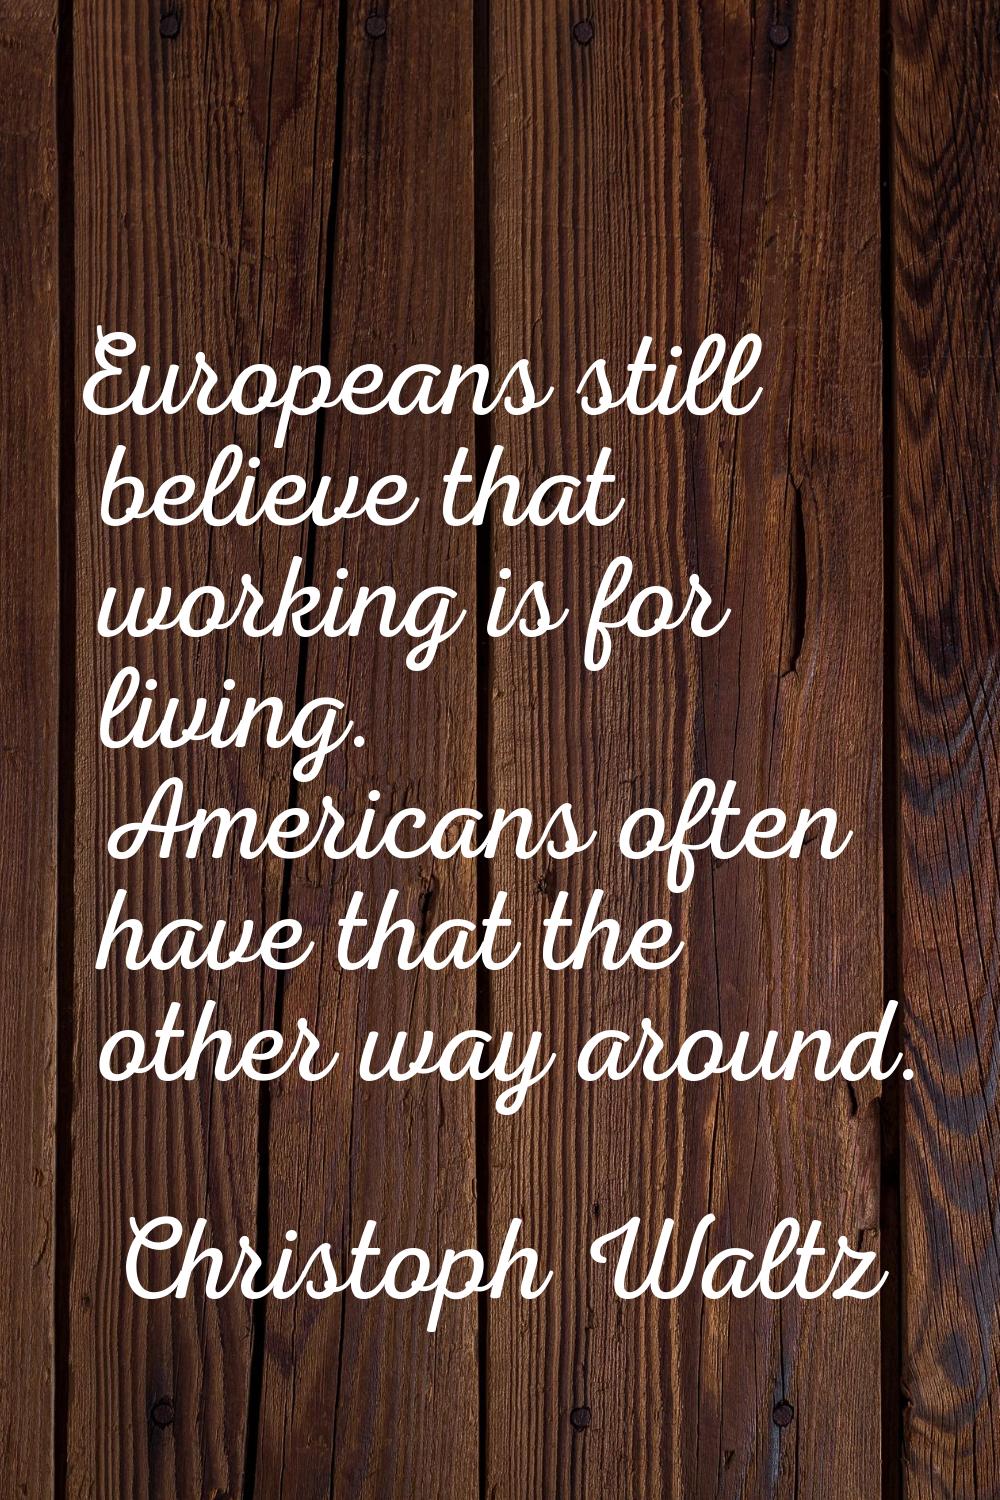 Europeans still believe that working is for living. Americans often have that the other way around.